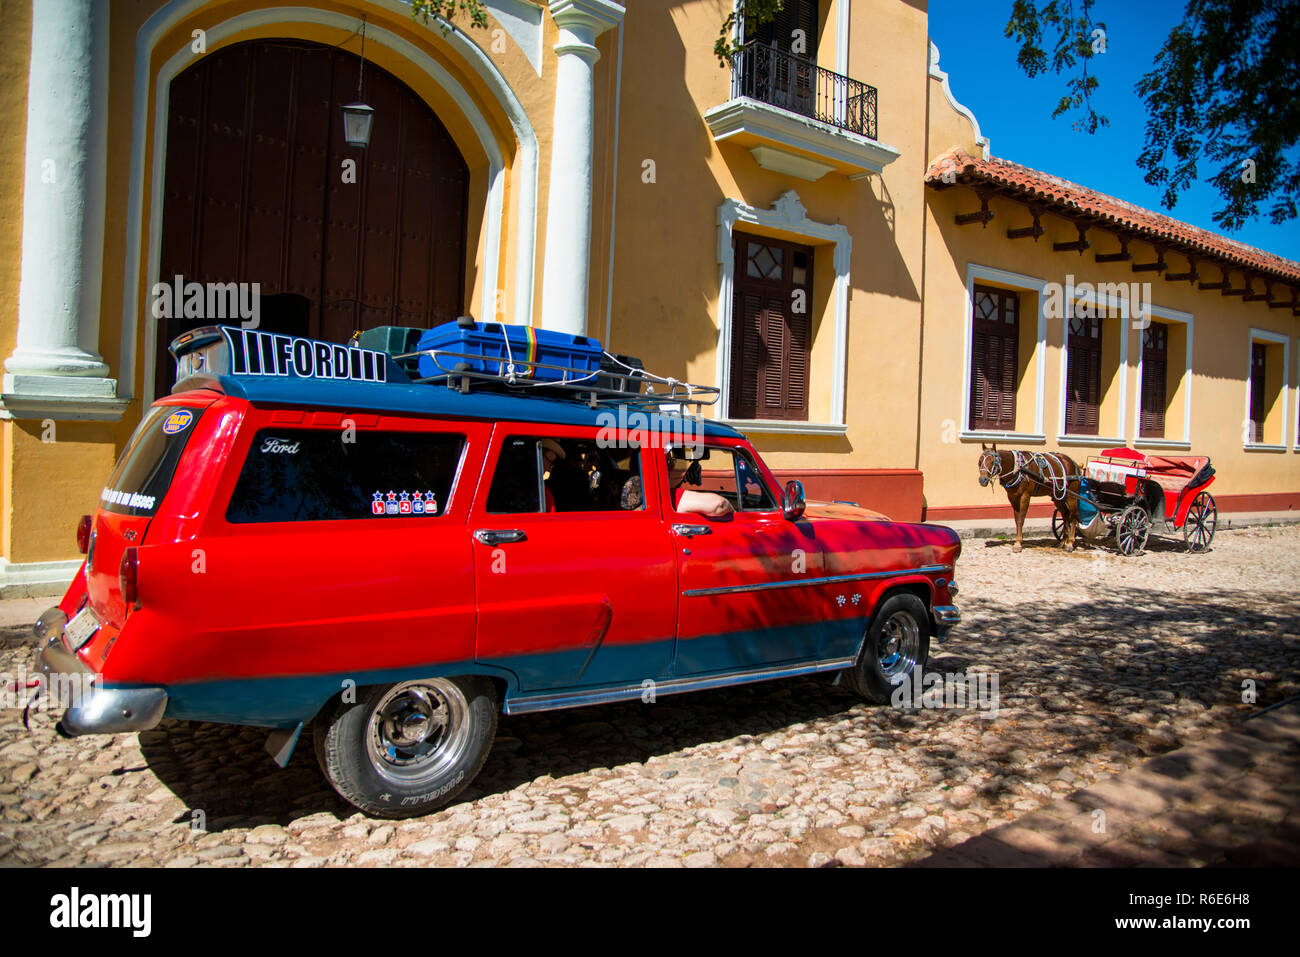 Ford station wagon in Trinidad, Cuba. Hose and carriage for tourists in the background. Stock Photo